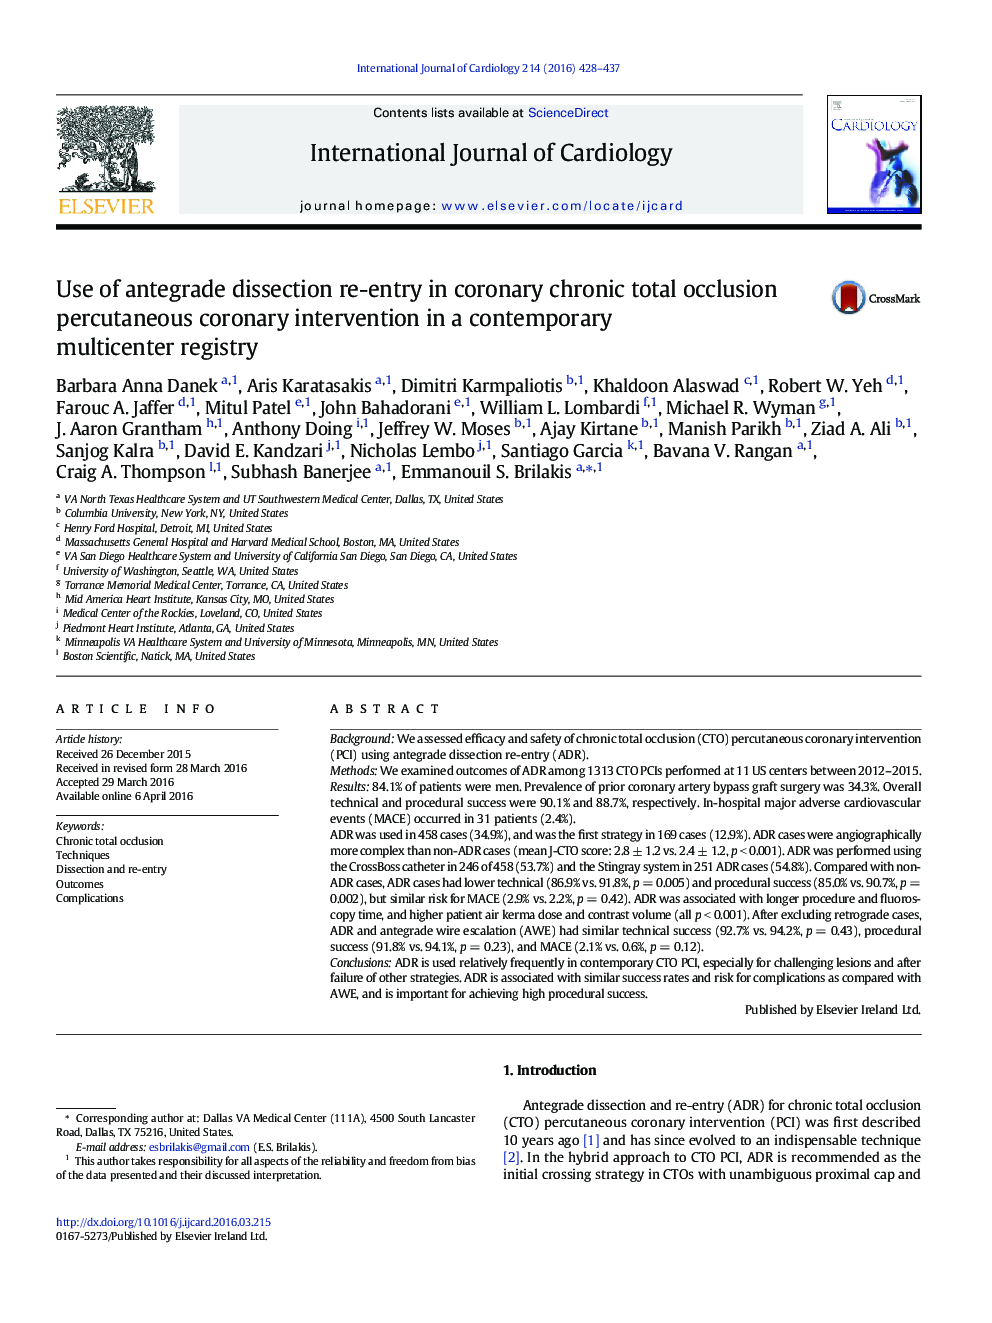 Use of antegrade dissection re-entry in coronary chronic total occlusion percutaneous coronary intervention in a contemporary multicenter registry